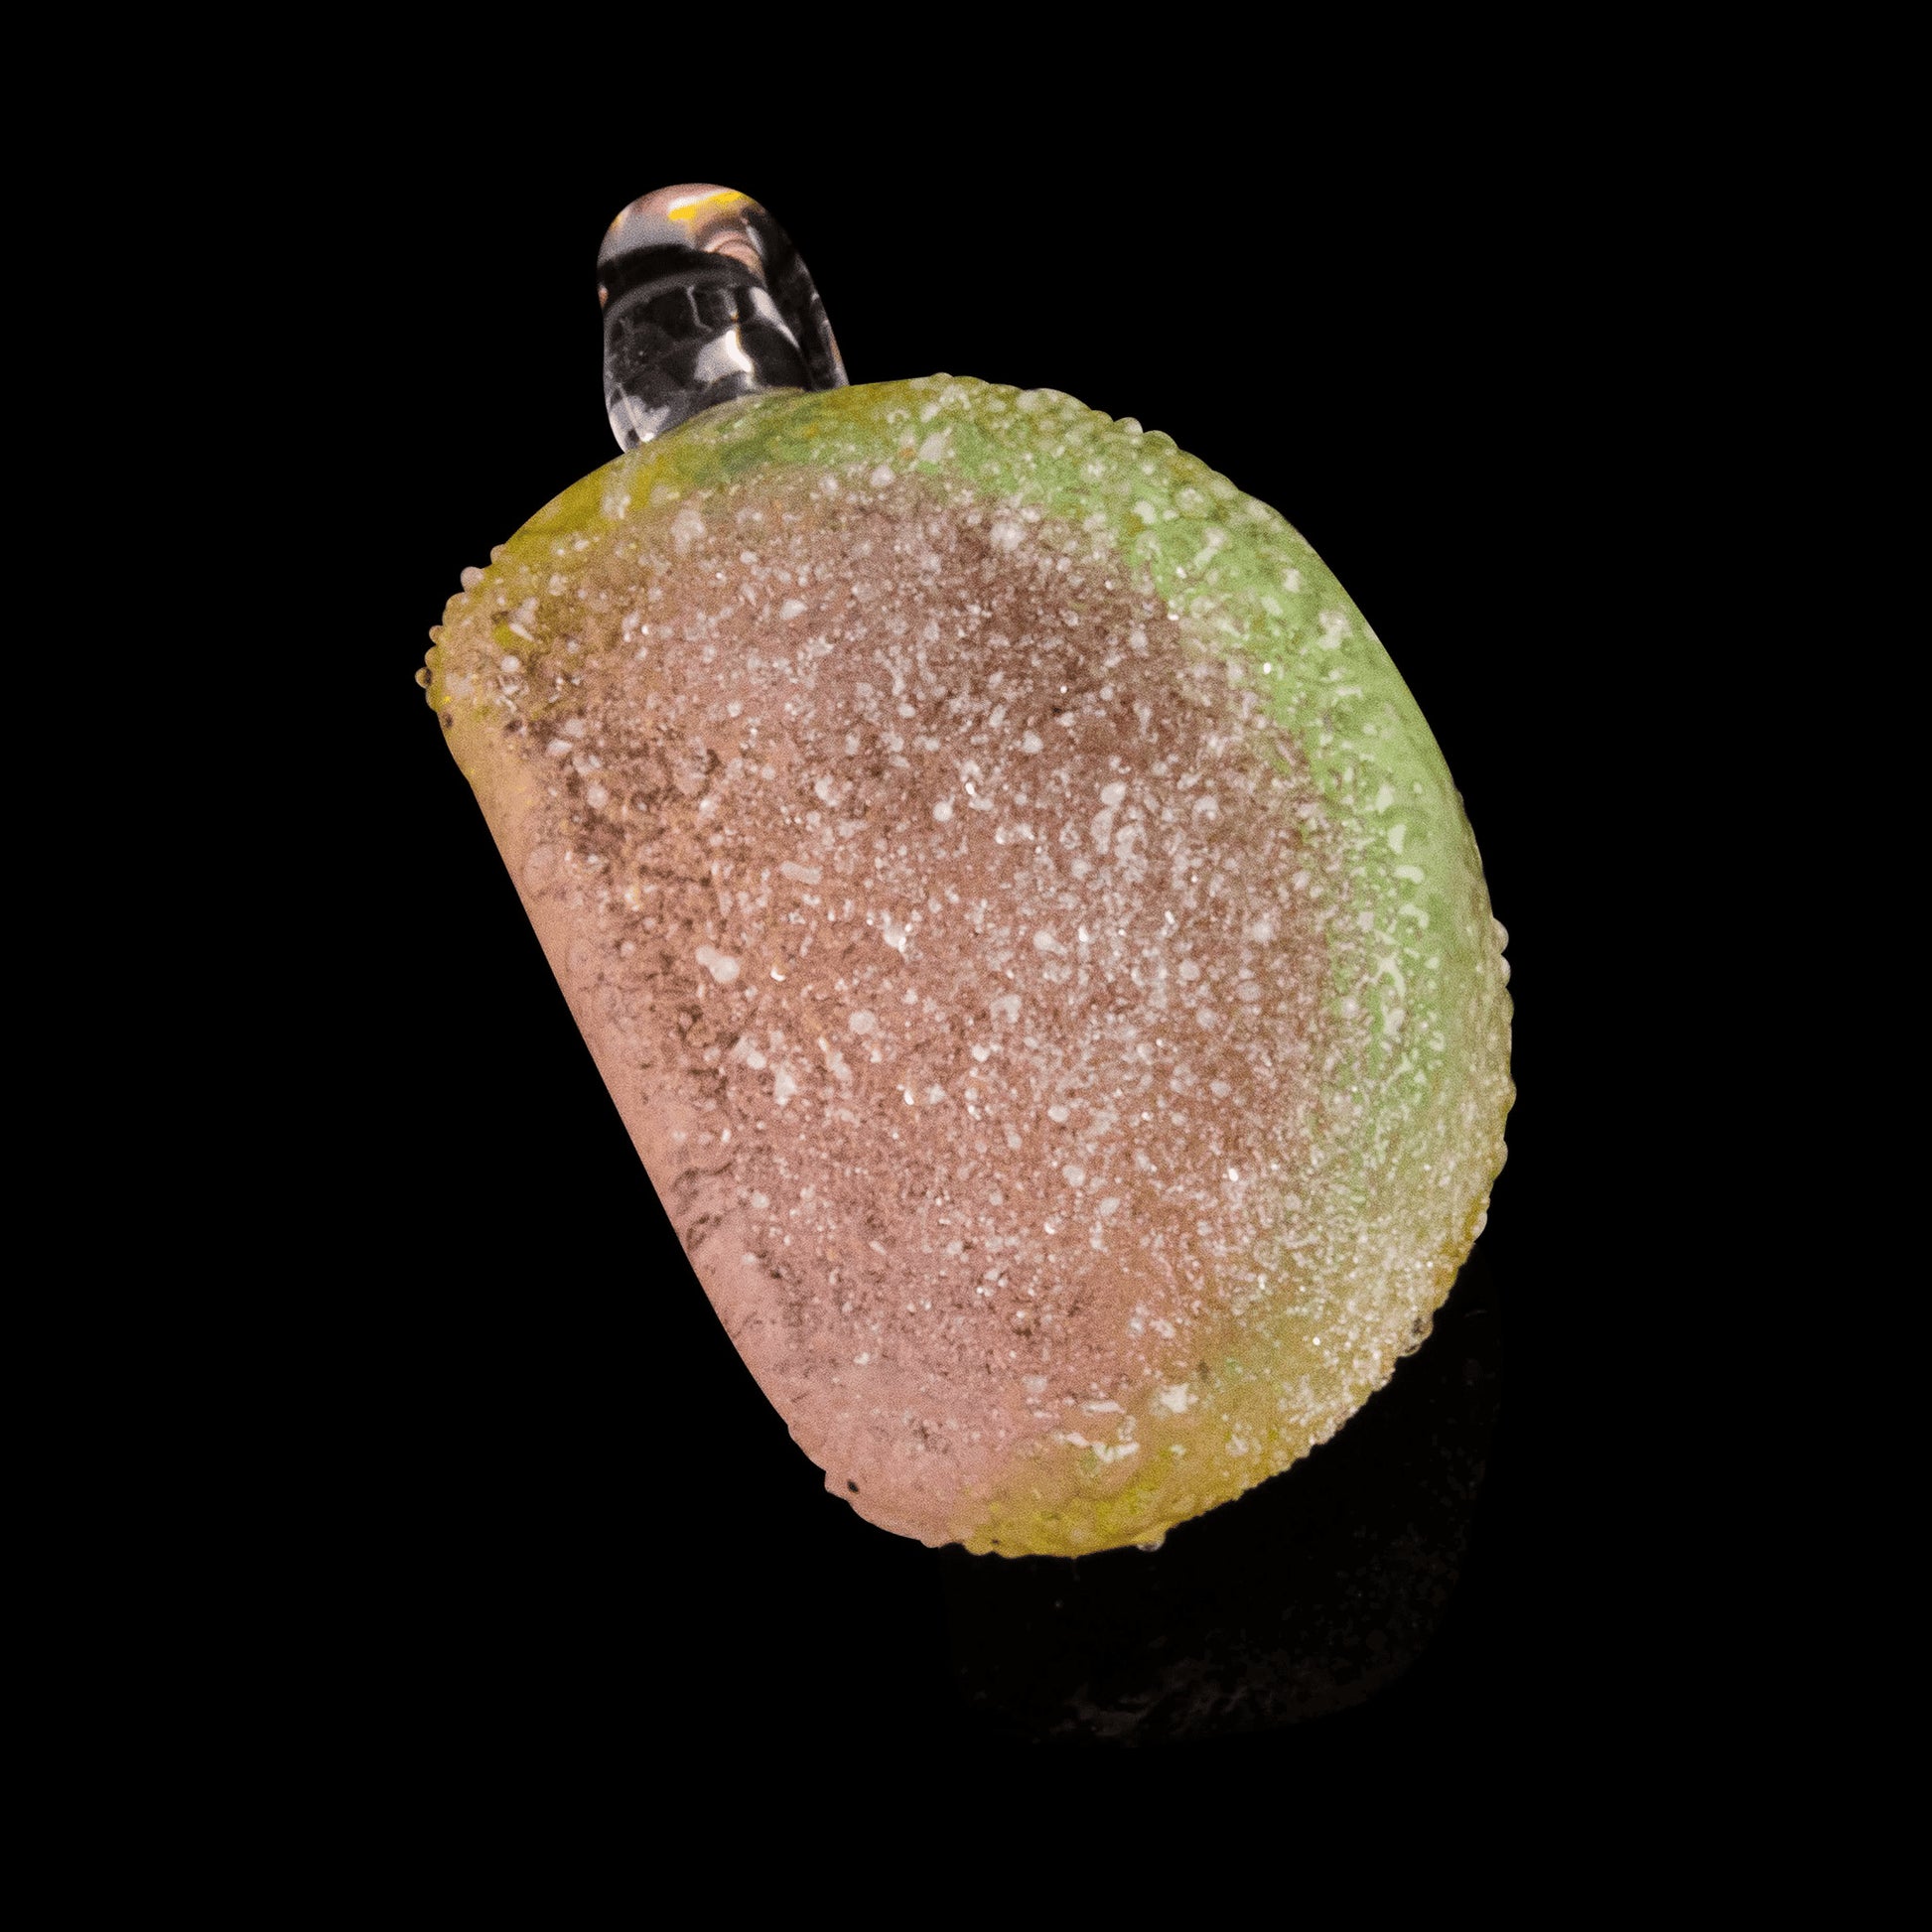 innovative glass pendant - Sour Watermelon Candy Pendant (C) by Emperial Glass (GV 2022)